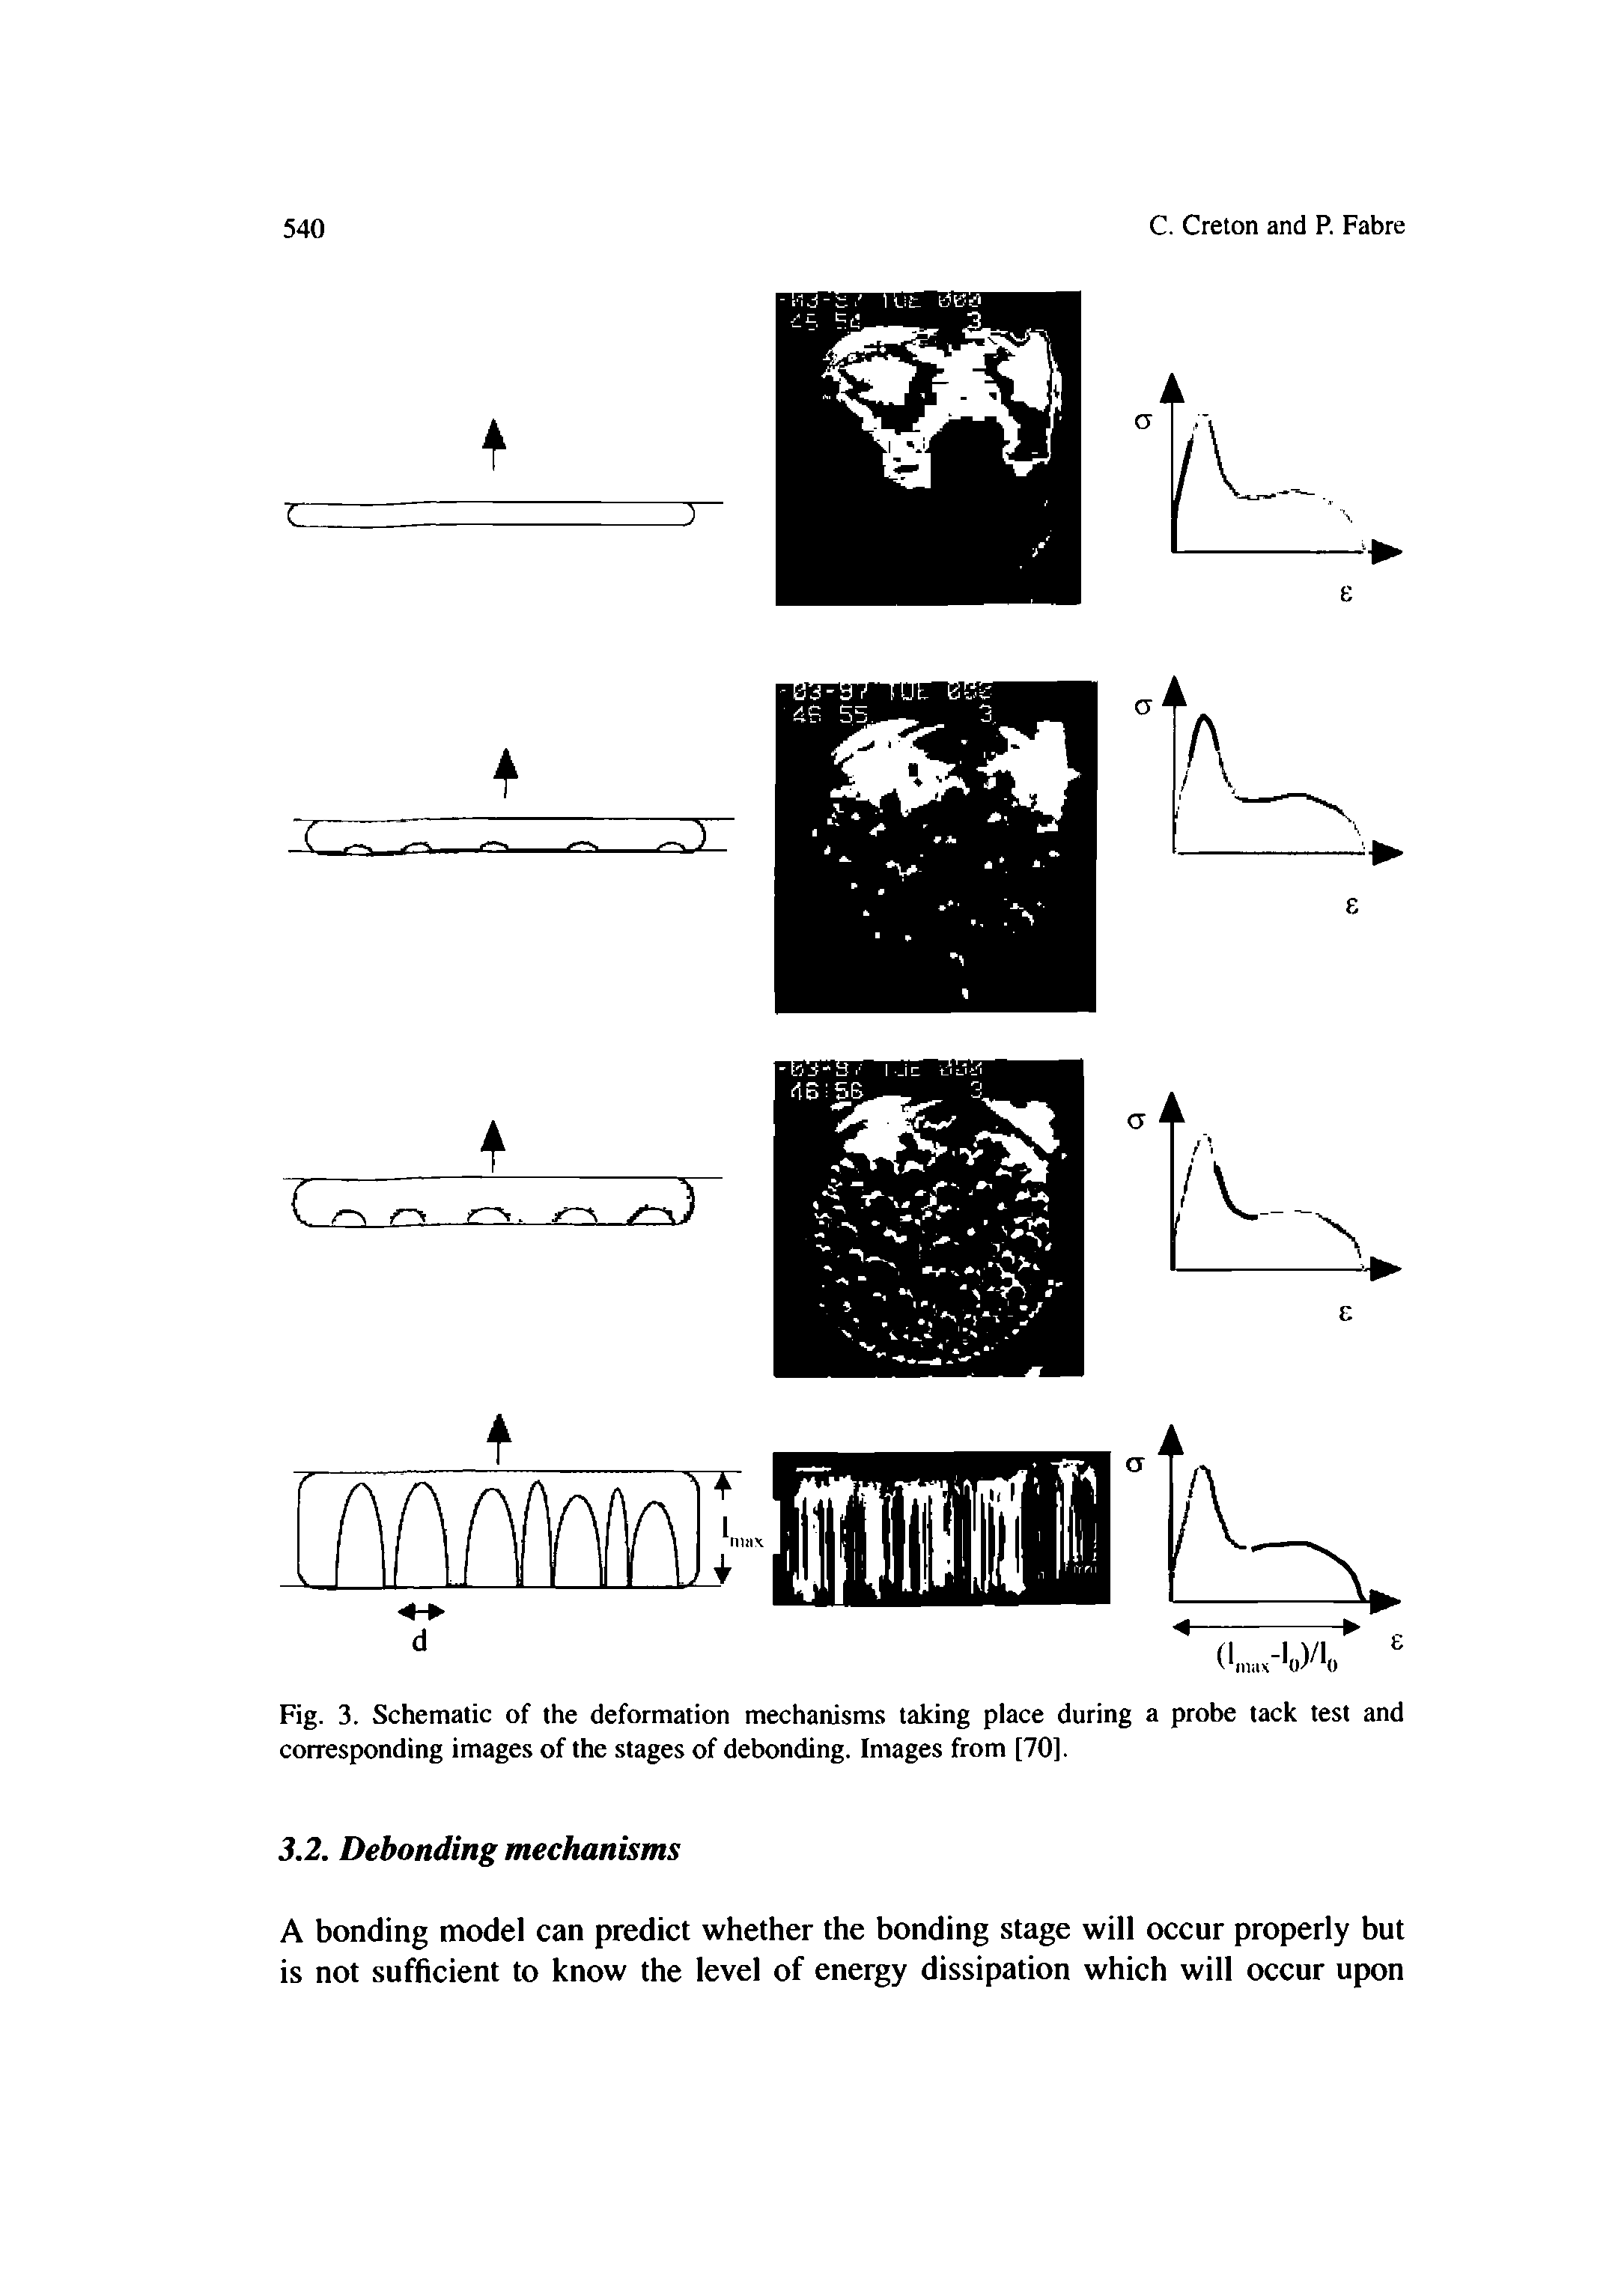 Fig. 3. Schematic of the deformation mechanisms taking place during a probe tack test and corresponding images of the stages of debonding. Images from [70].